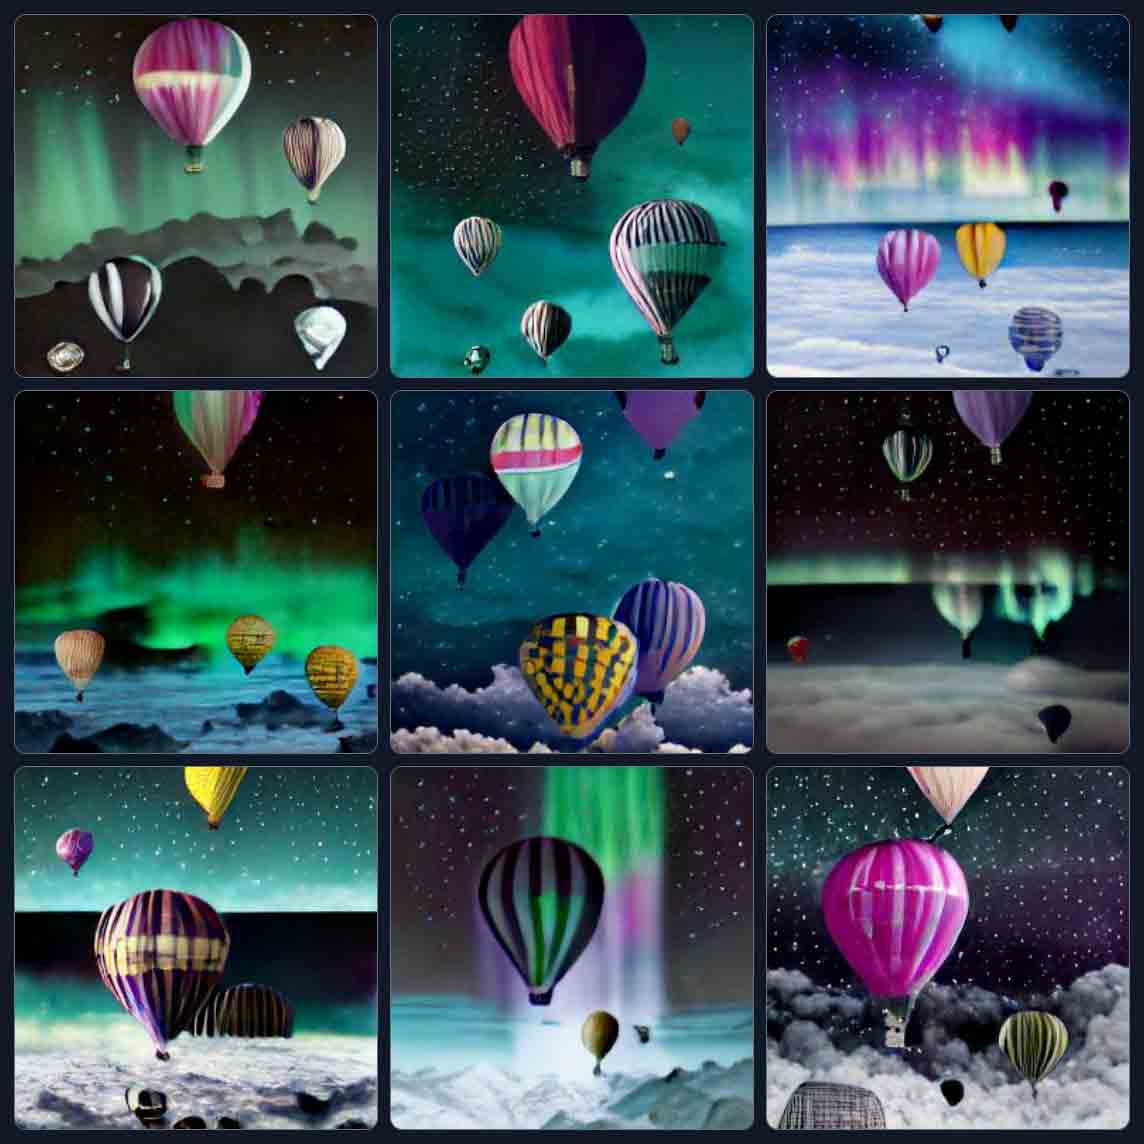 9 images, each depicting hot air balloons floating above clouds. The color palette generally matches what I identified, with teals, purples, and blacks prominent. Auroras are visible in most, but some of the skies are white clouds and feel like Earth. None of them has any text.